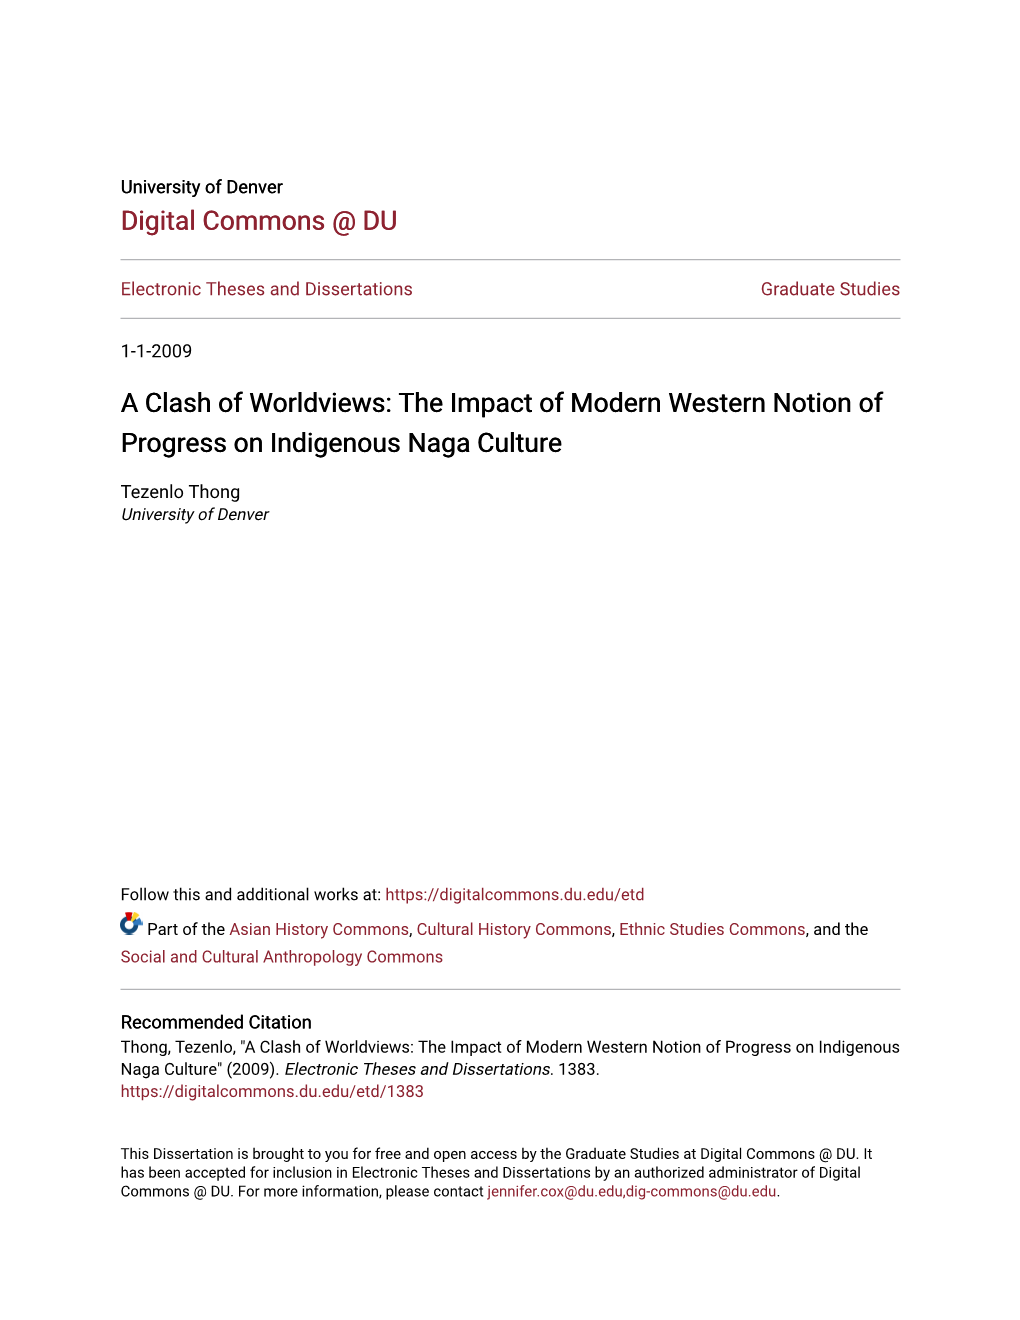 A Clash of Worldviews: the Impact of Modern Western Notion of Progress on Indigenous Naga Culture